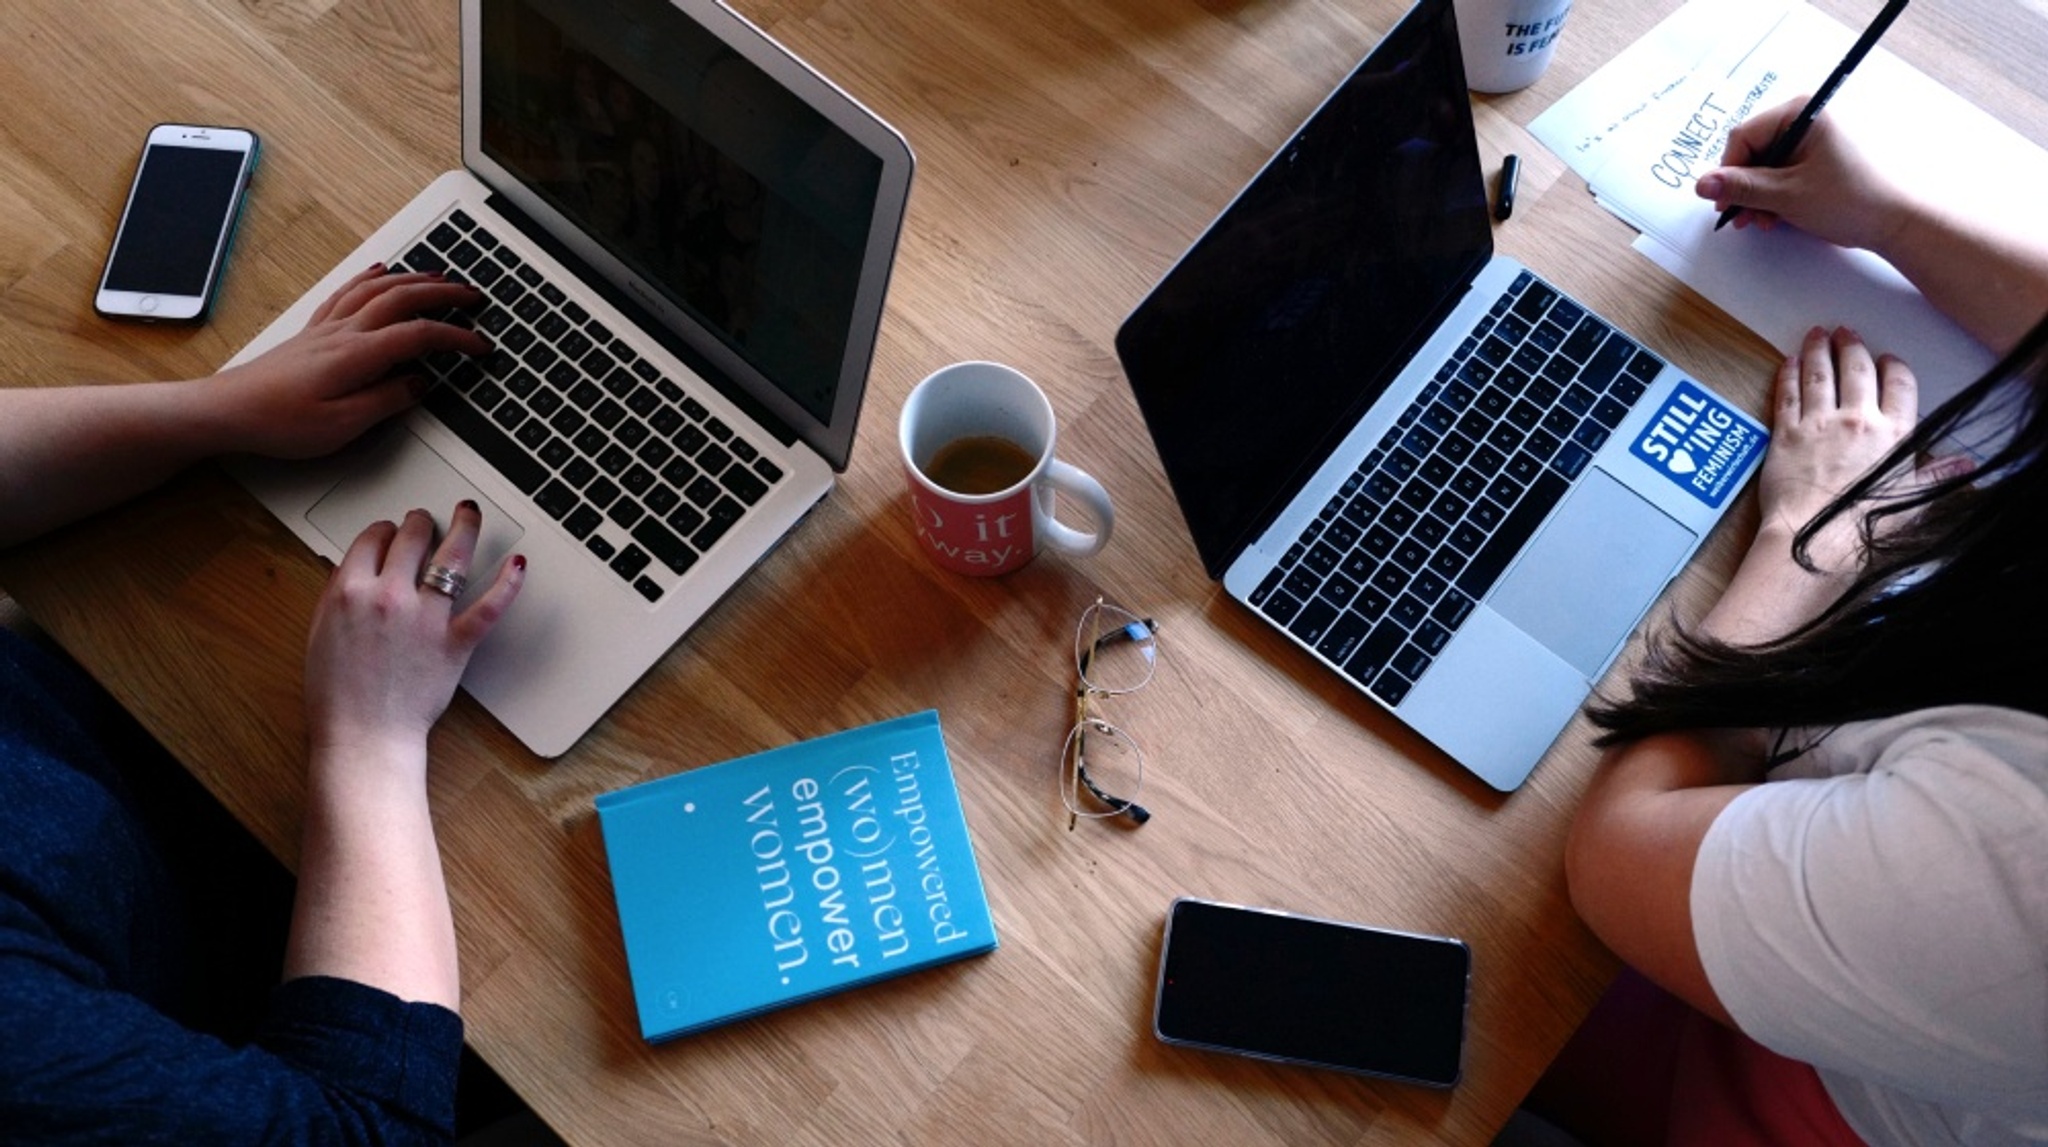 View on a desk from above: two women sit on a desk next to each other with their phones and coffee cups besides their laptops. The scene prominently shows a journal with the text "Empowered (wo)men empower women." A sticker on one laptop says "Still loving Feminism".